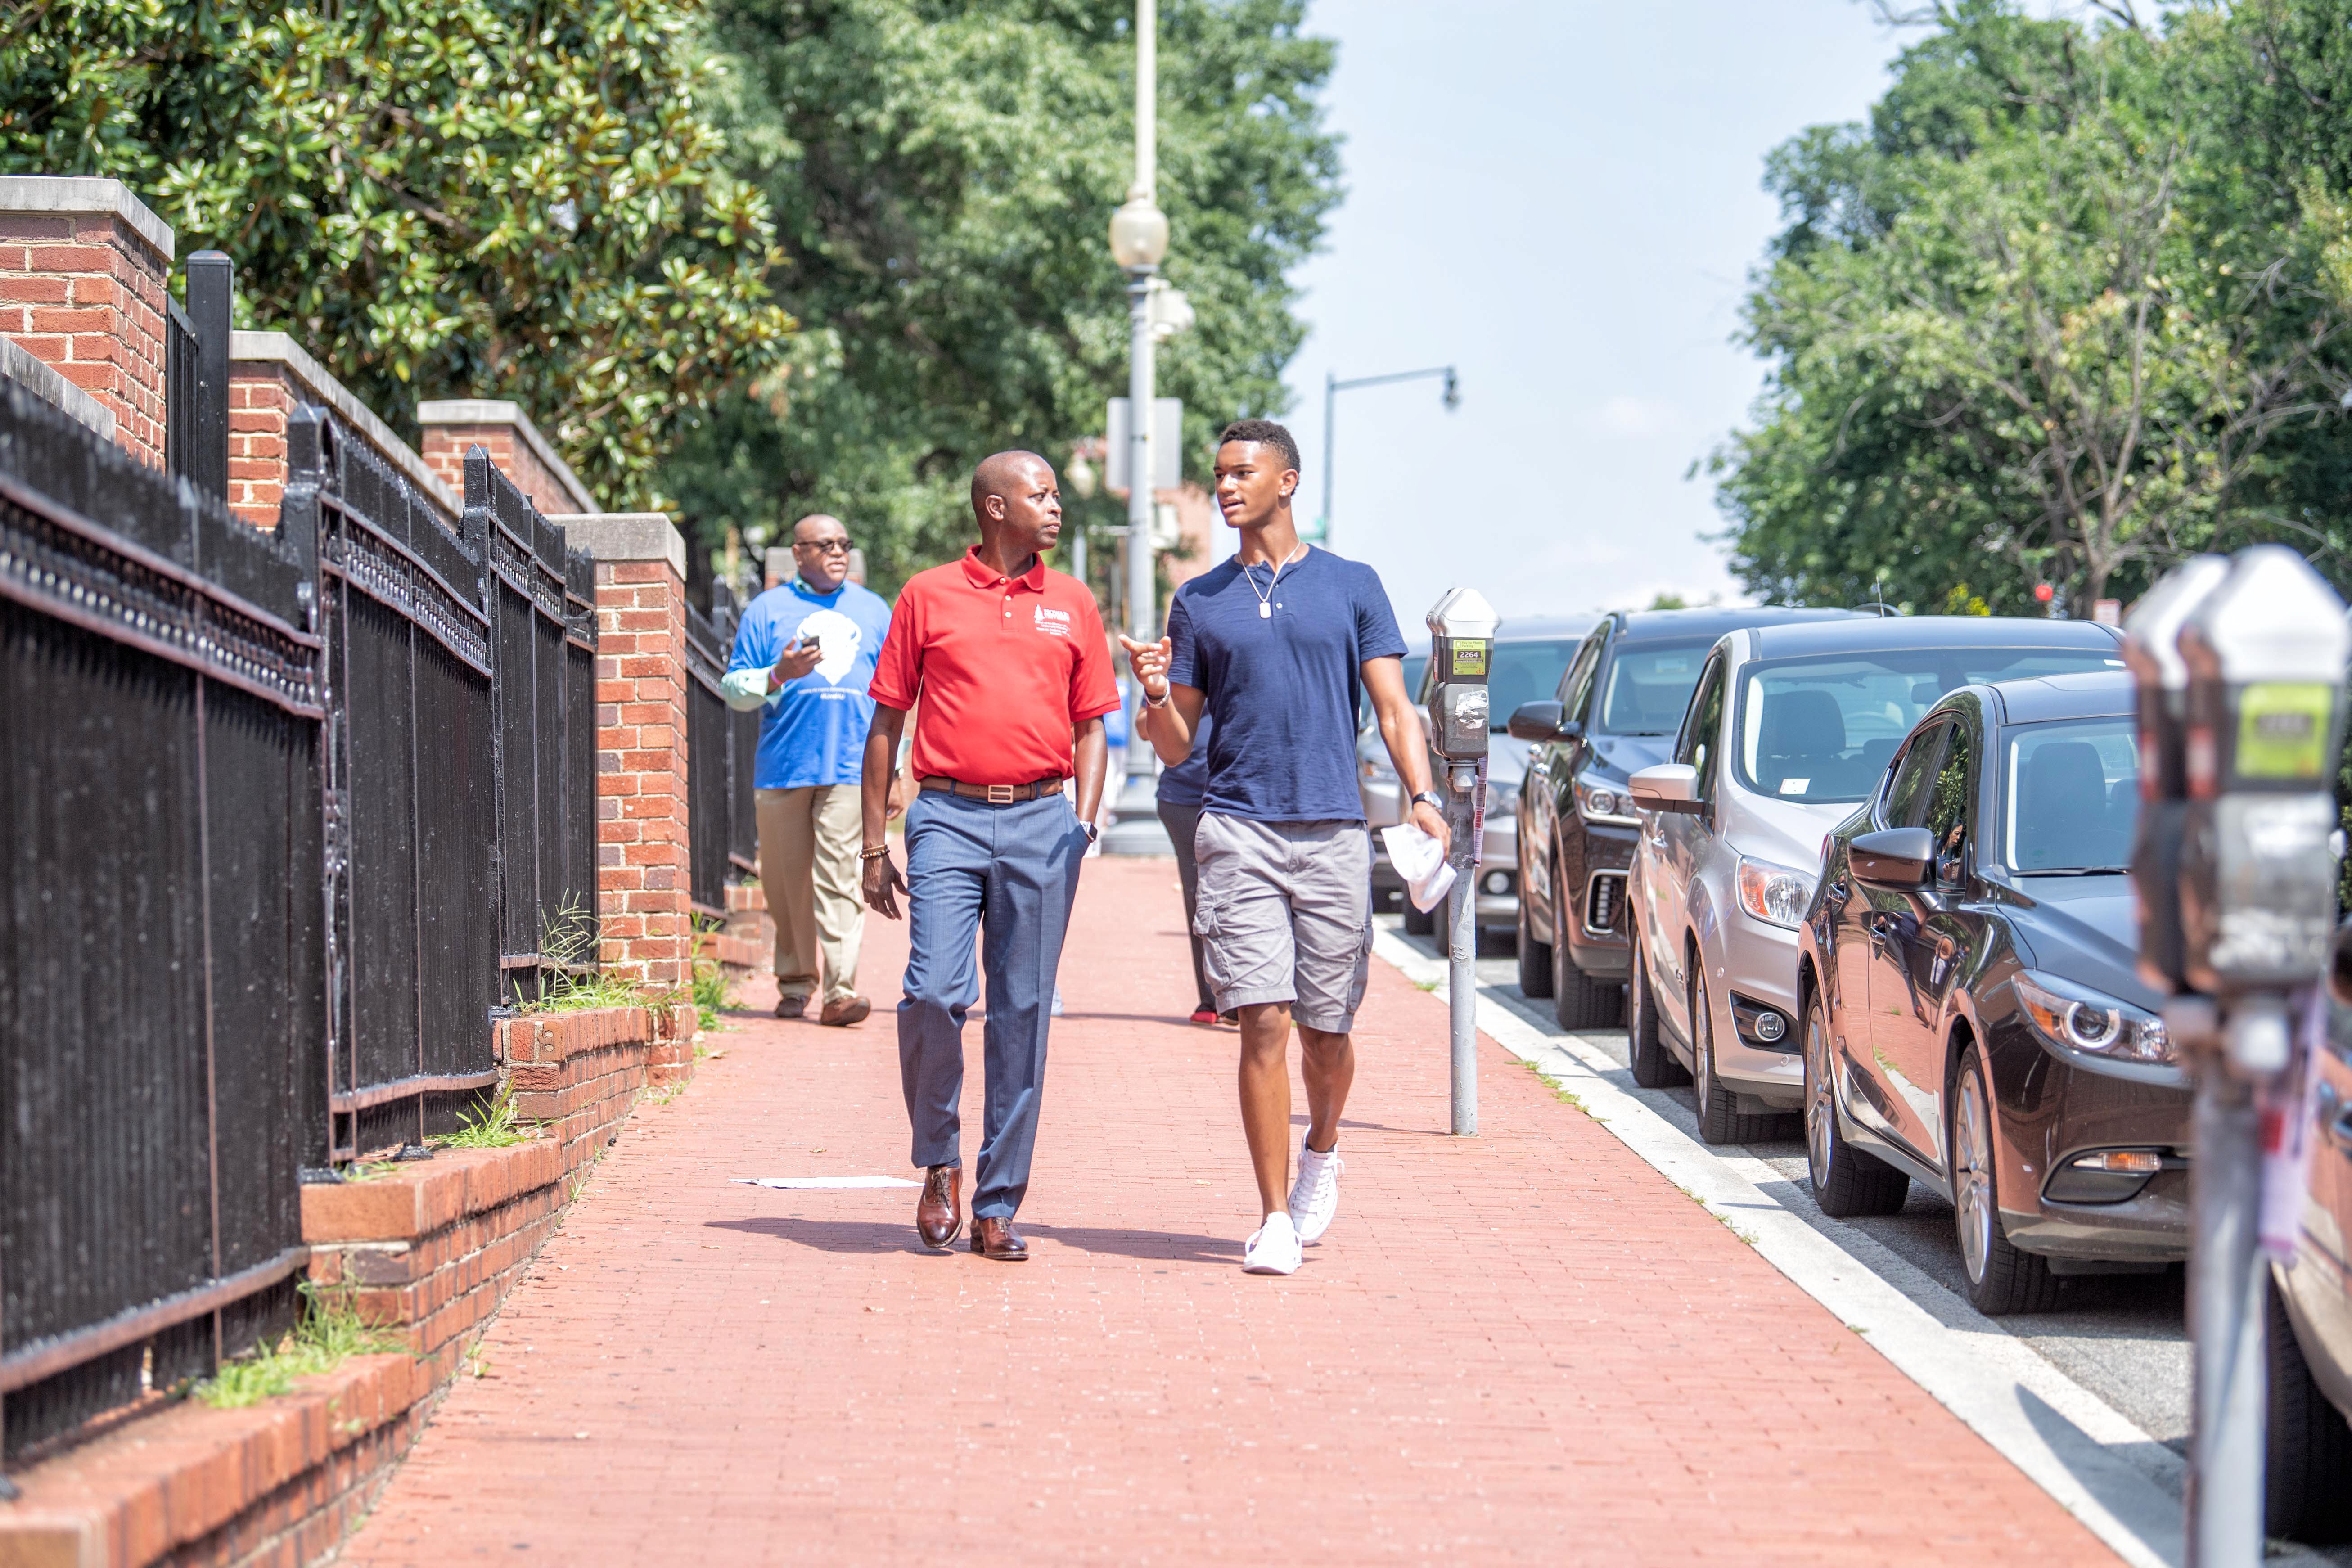 President Frederick walking on campus with a student.